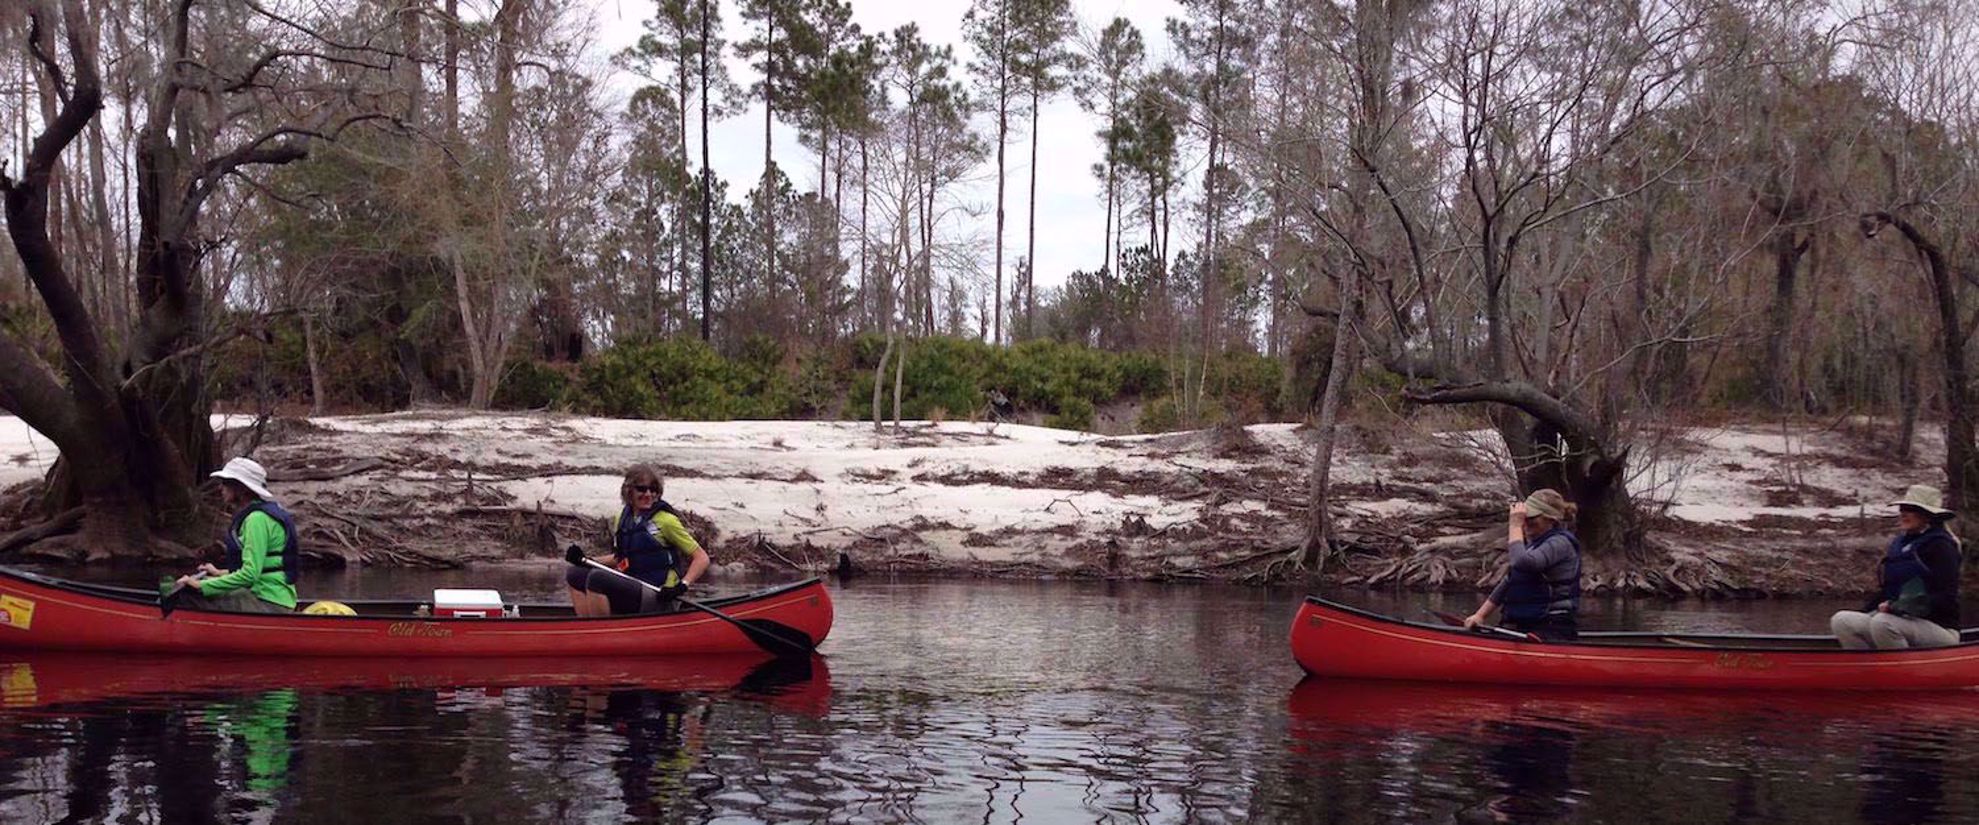 women laughing and smiling in red kayaks on suwannee river